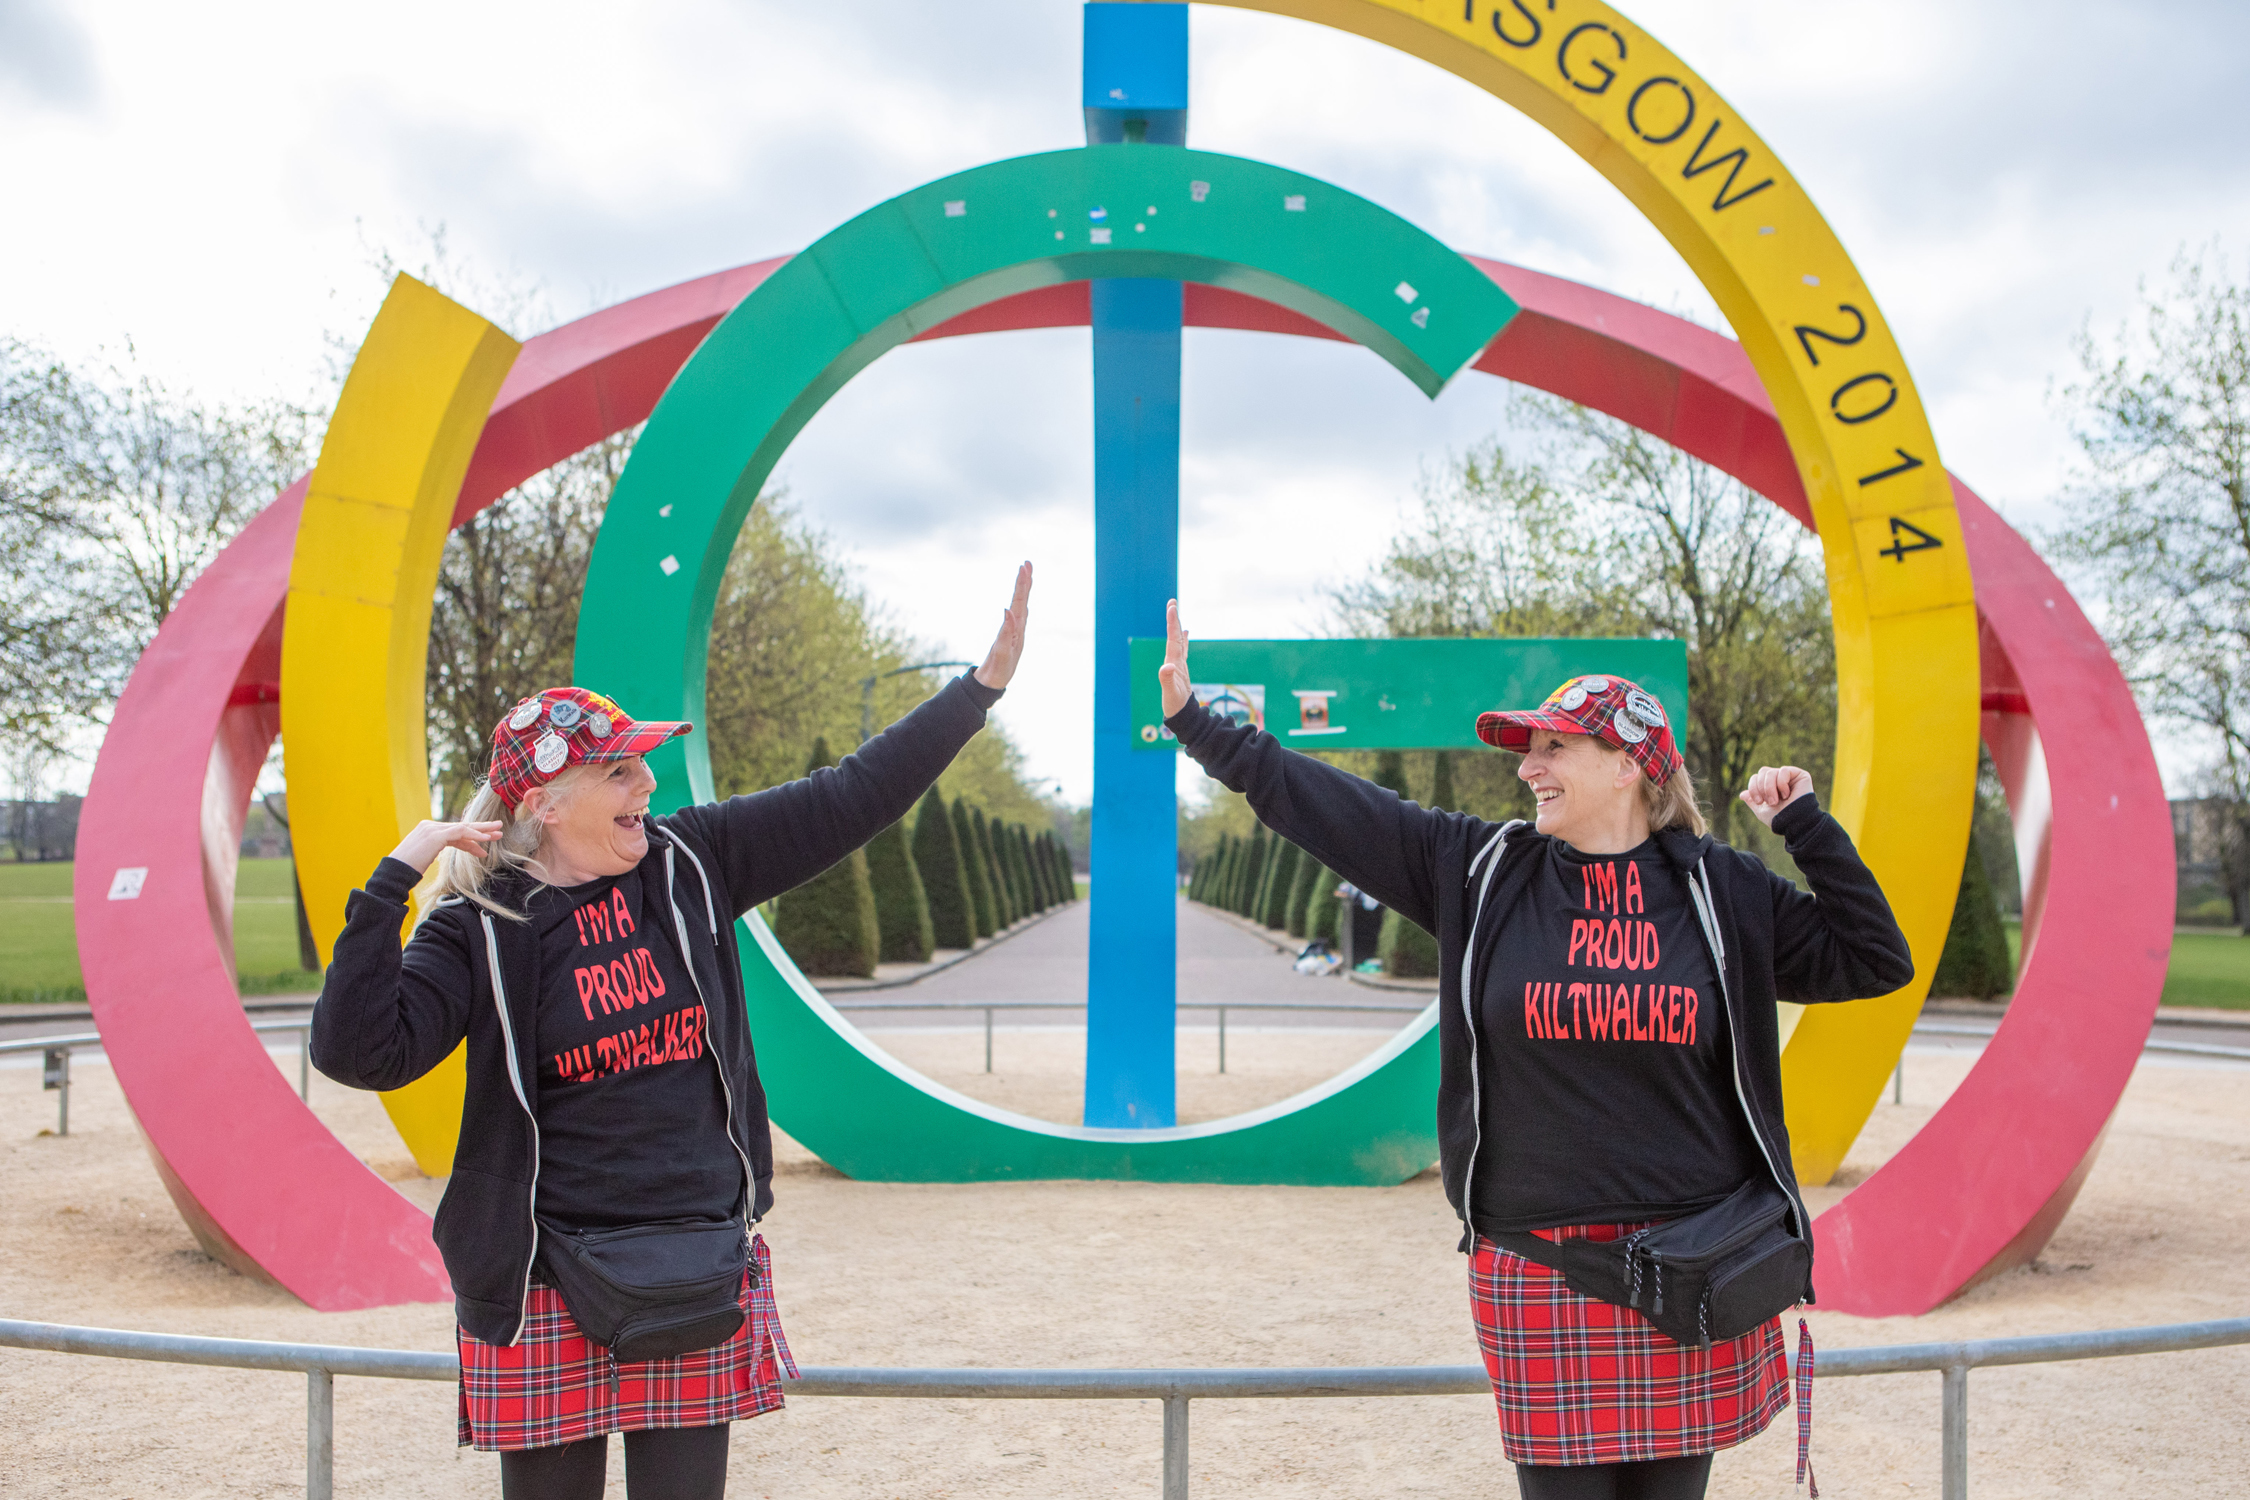 Virtual Kiltwalk 23-25 April, 2021 L-R Jacqueline Wilson and Irene Brown from Glasgow warm up before they begin their 26 mile Virtual Kiltwalk at Glasgow Green